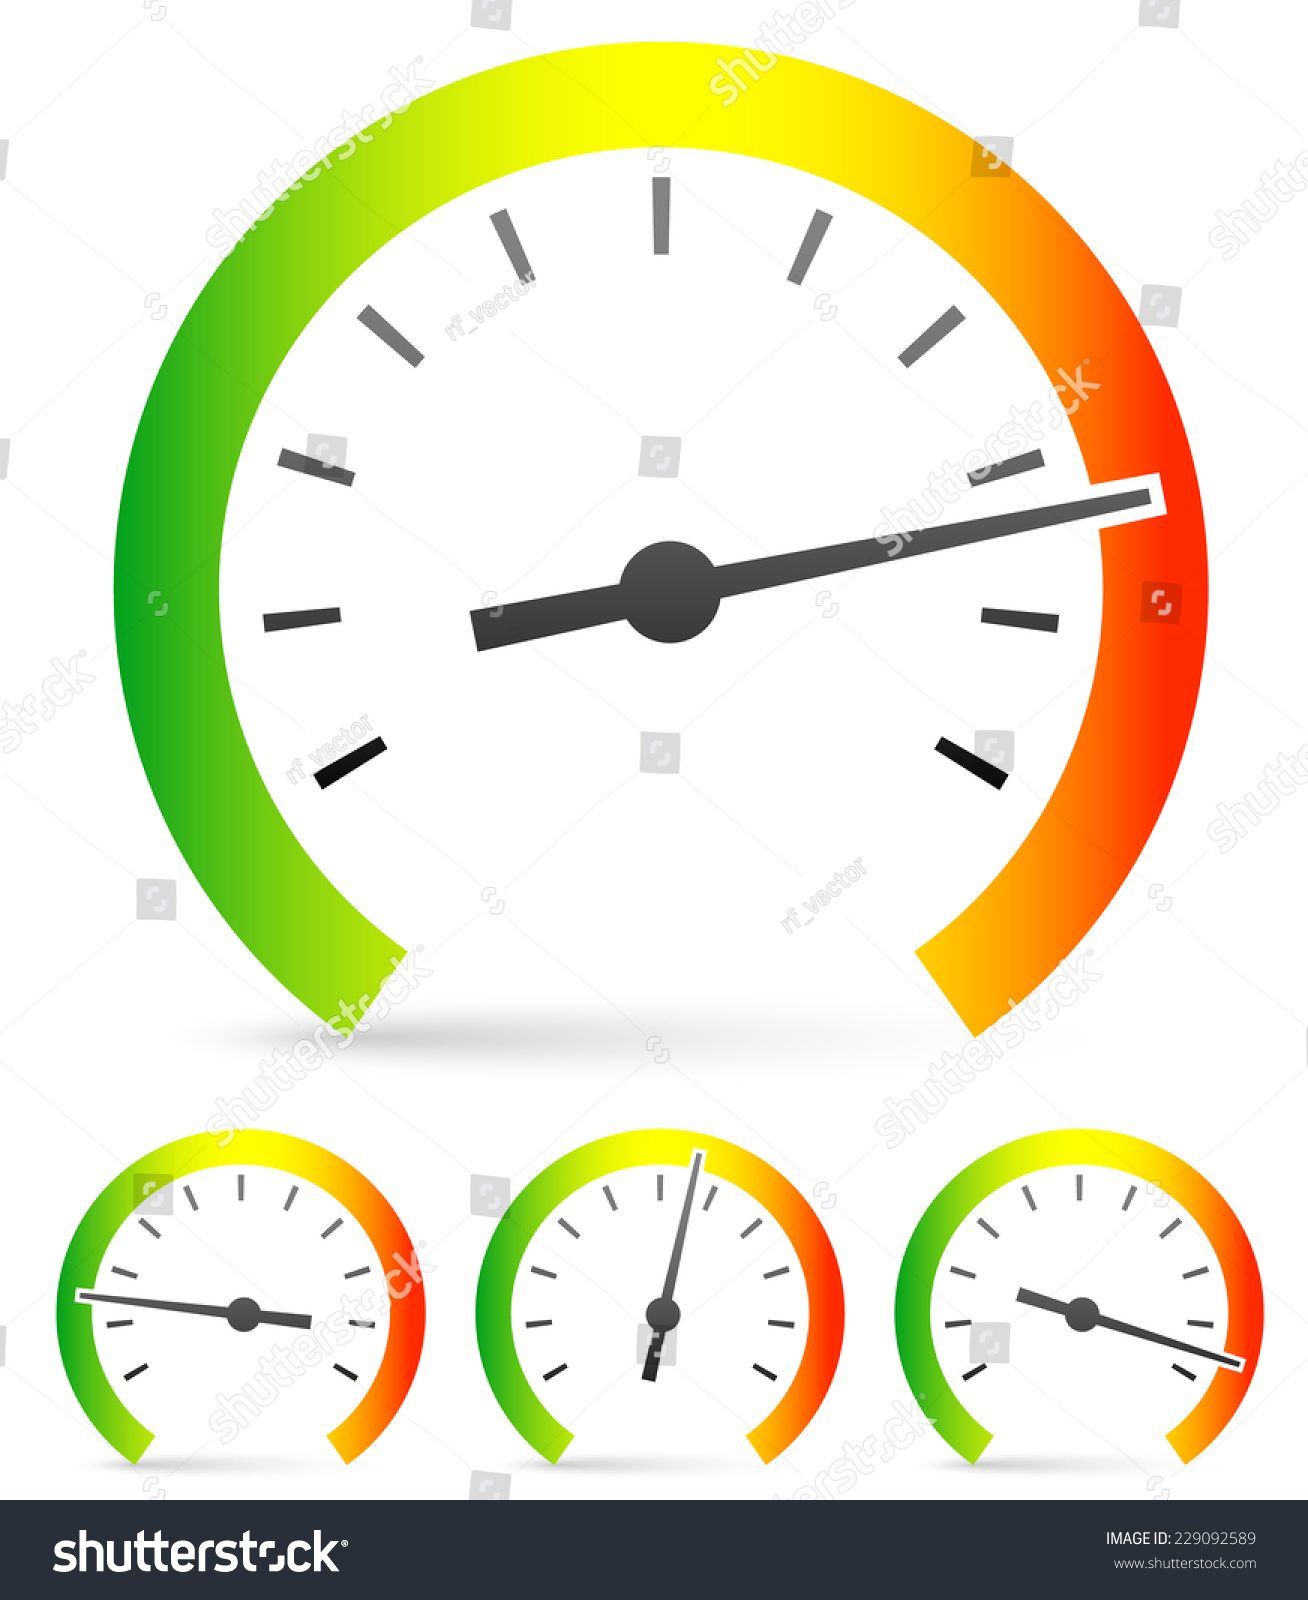 SVG of Speedometer or general gauge, dial template for measuring, comparison concepts. Vector icon. svg